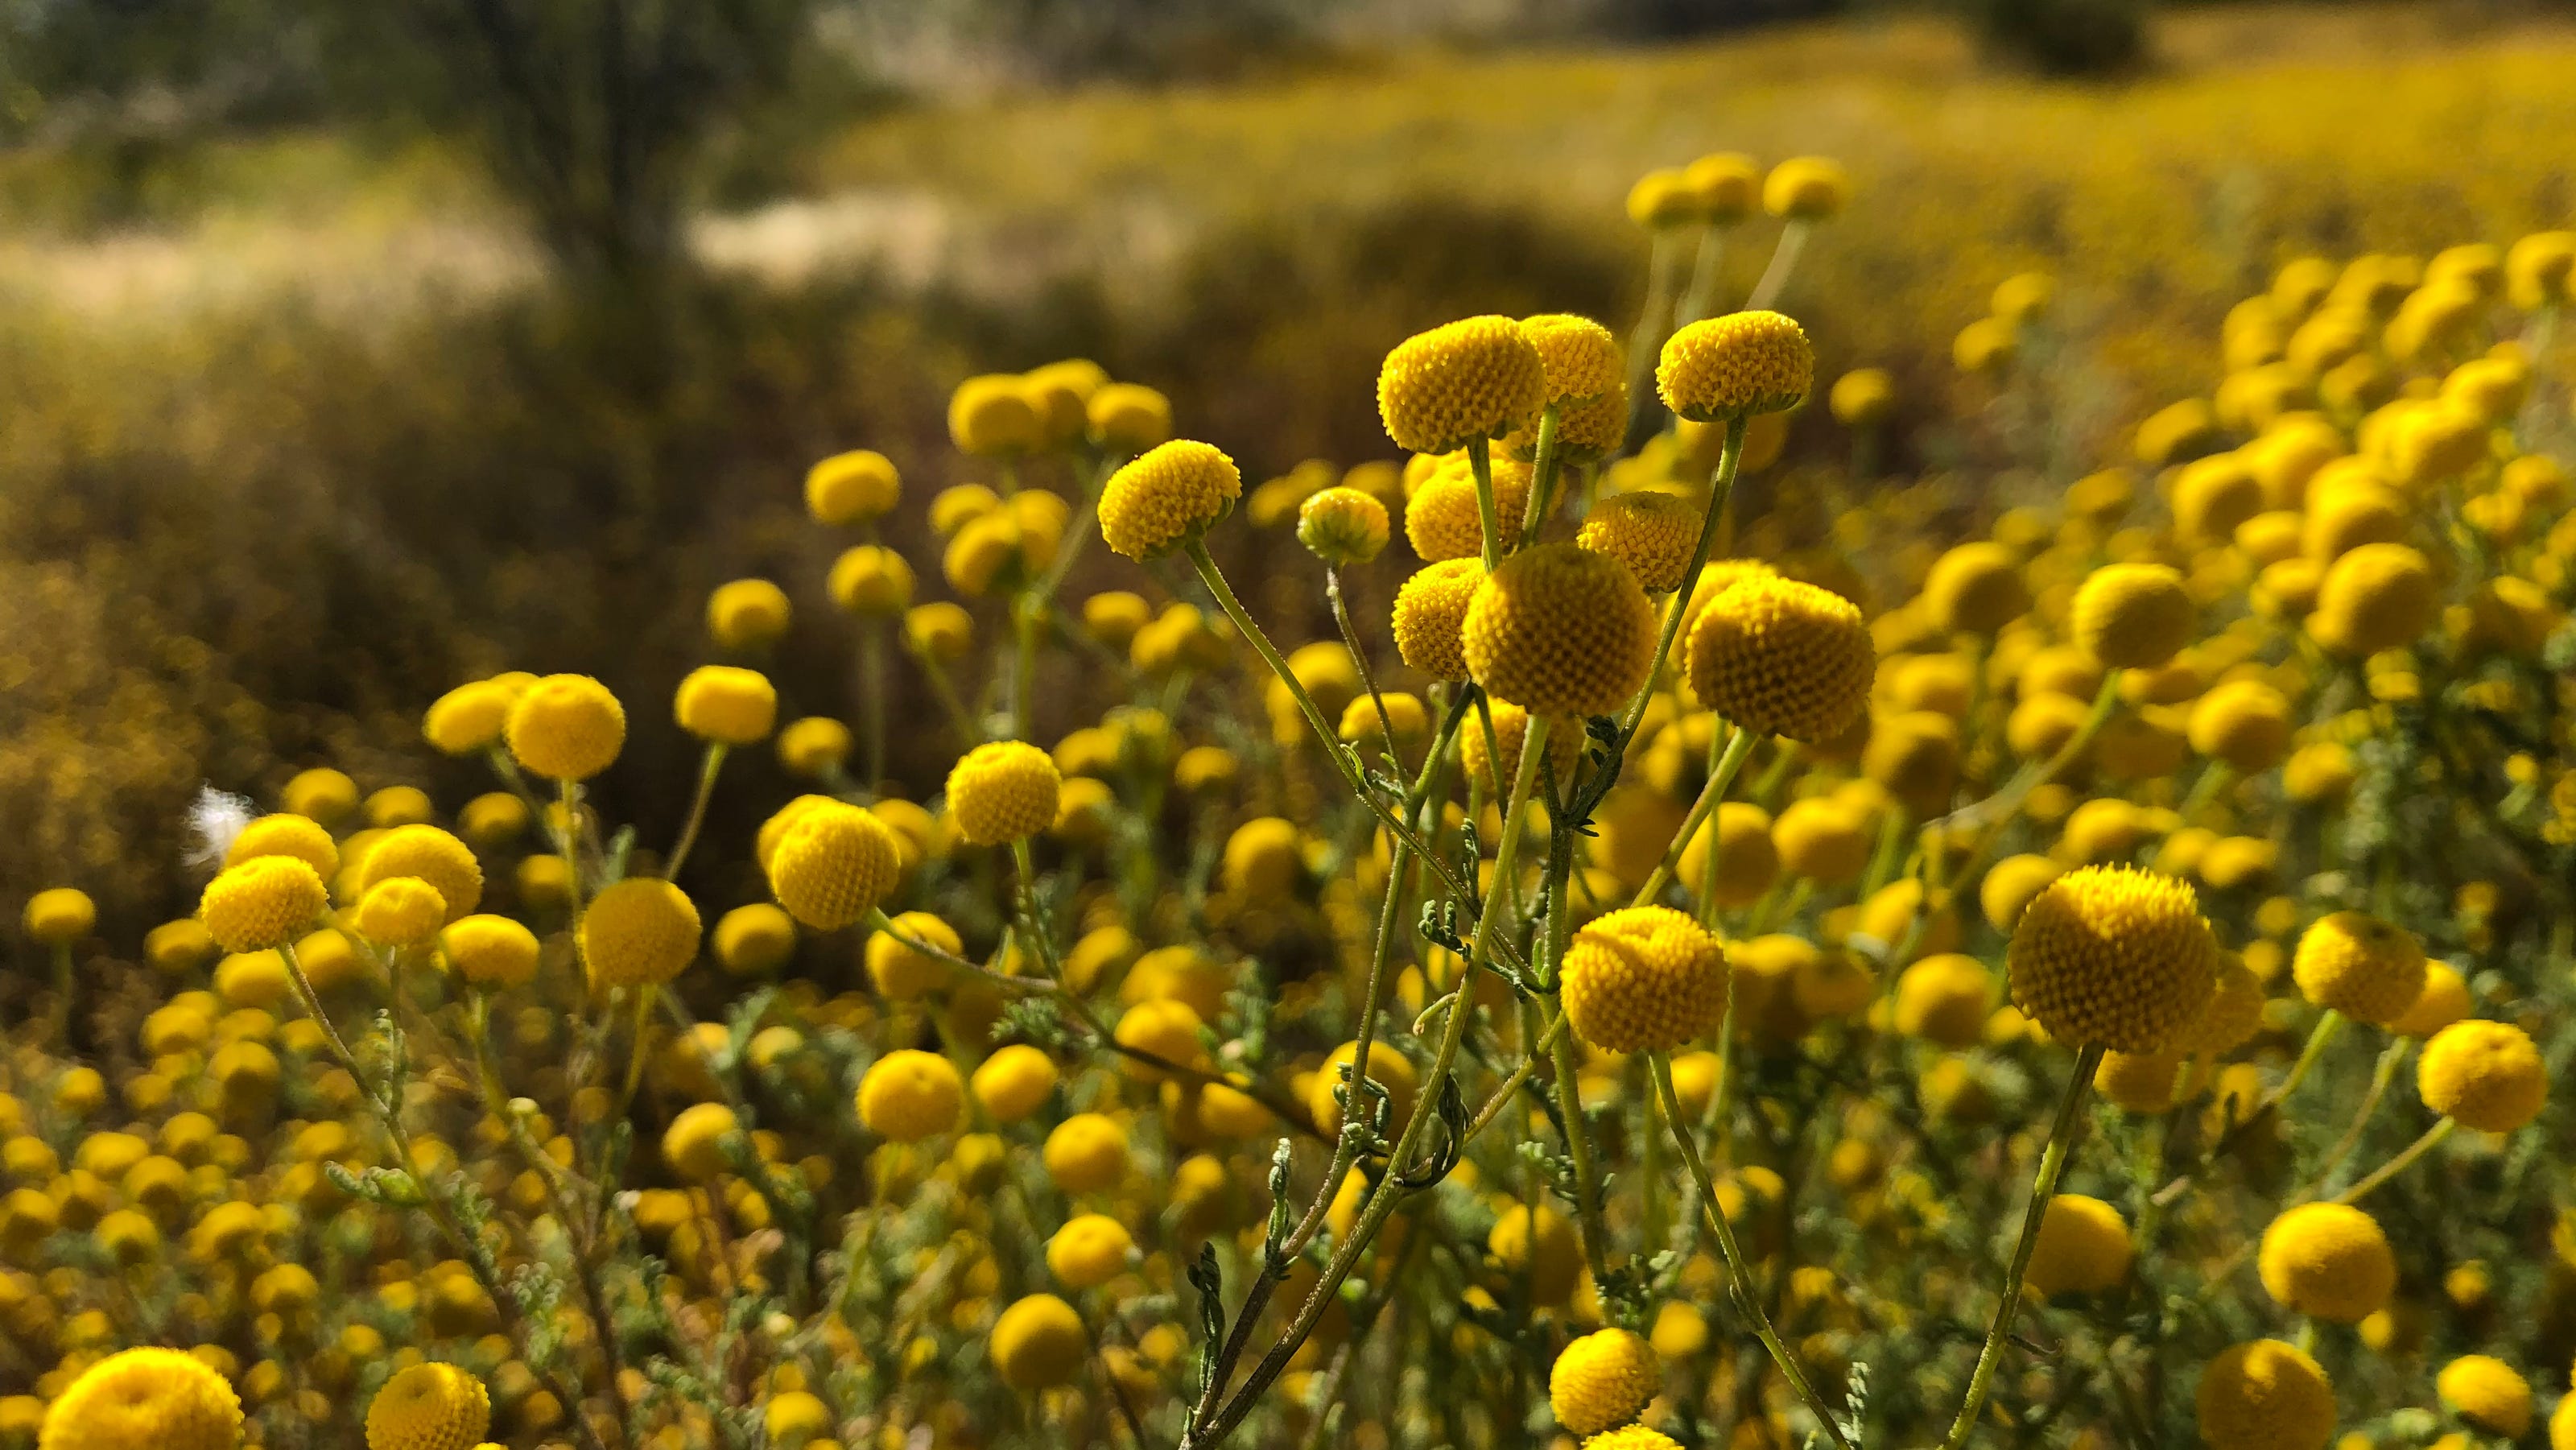 Those Friendly Looking Yellow Flowers Globe Chamomile An Invasive Weed